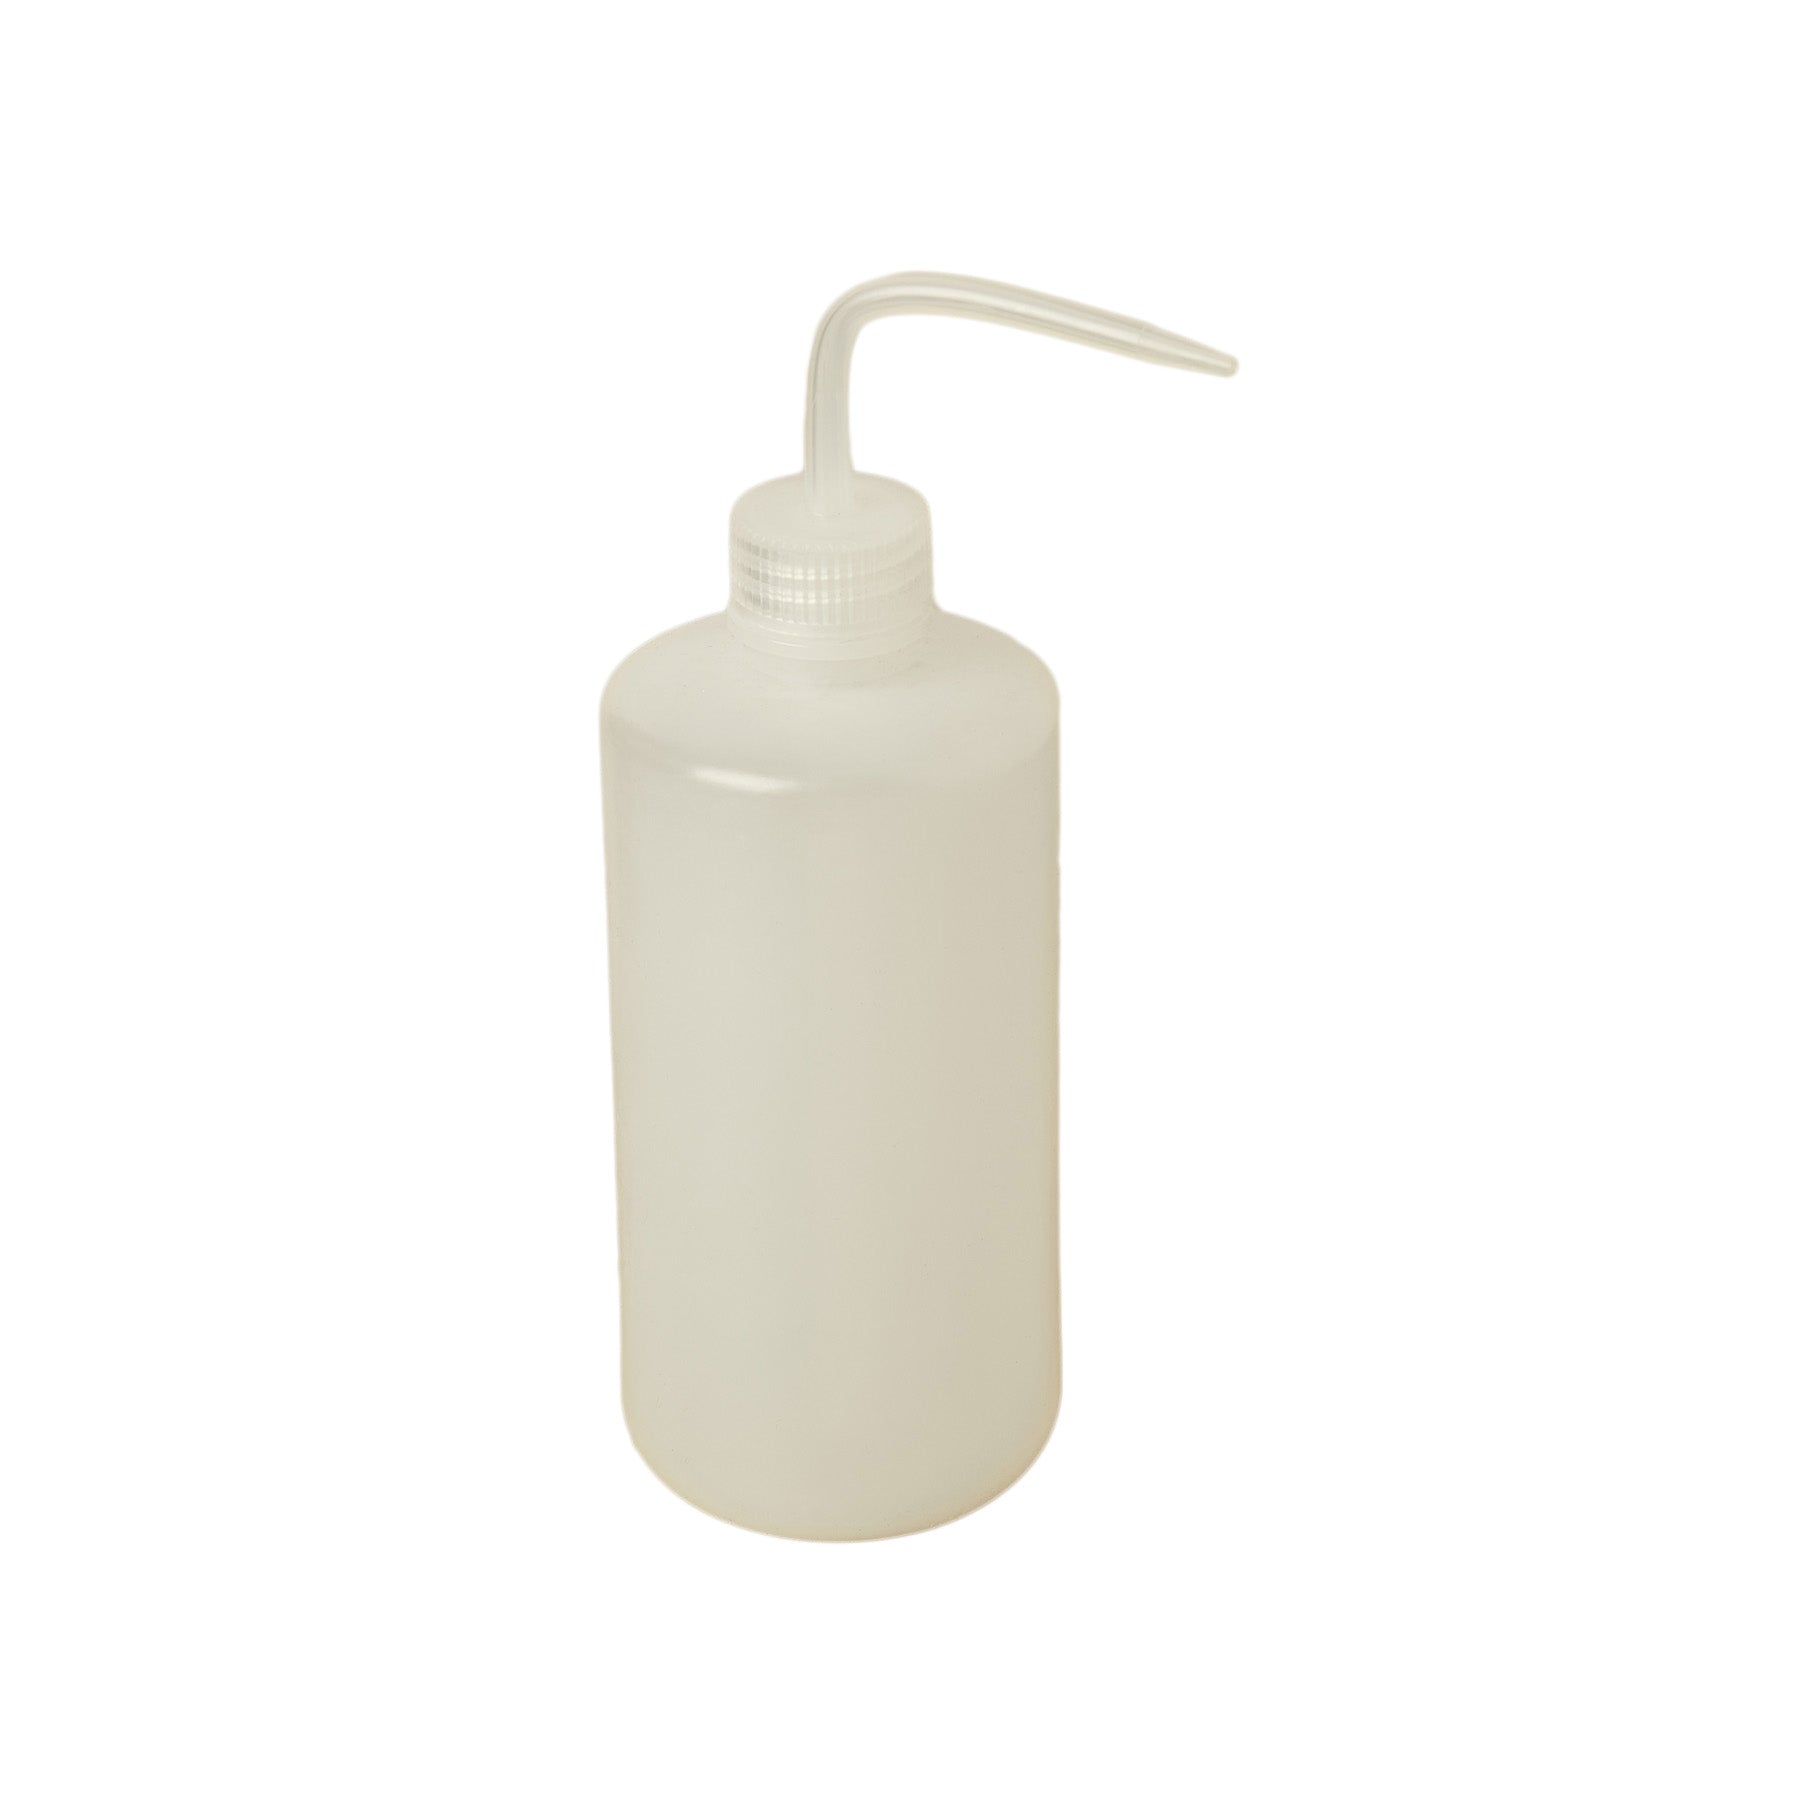 A white plastic bottle with a handle on a white background, available at top garden centers near me.